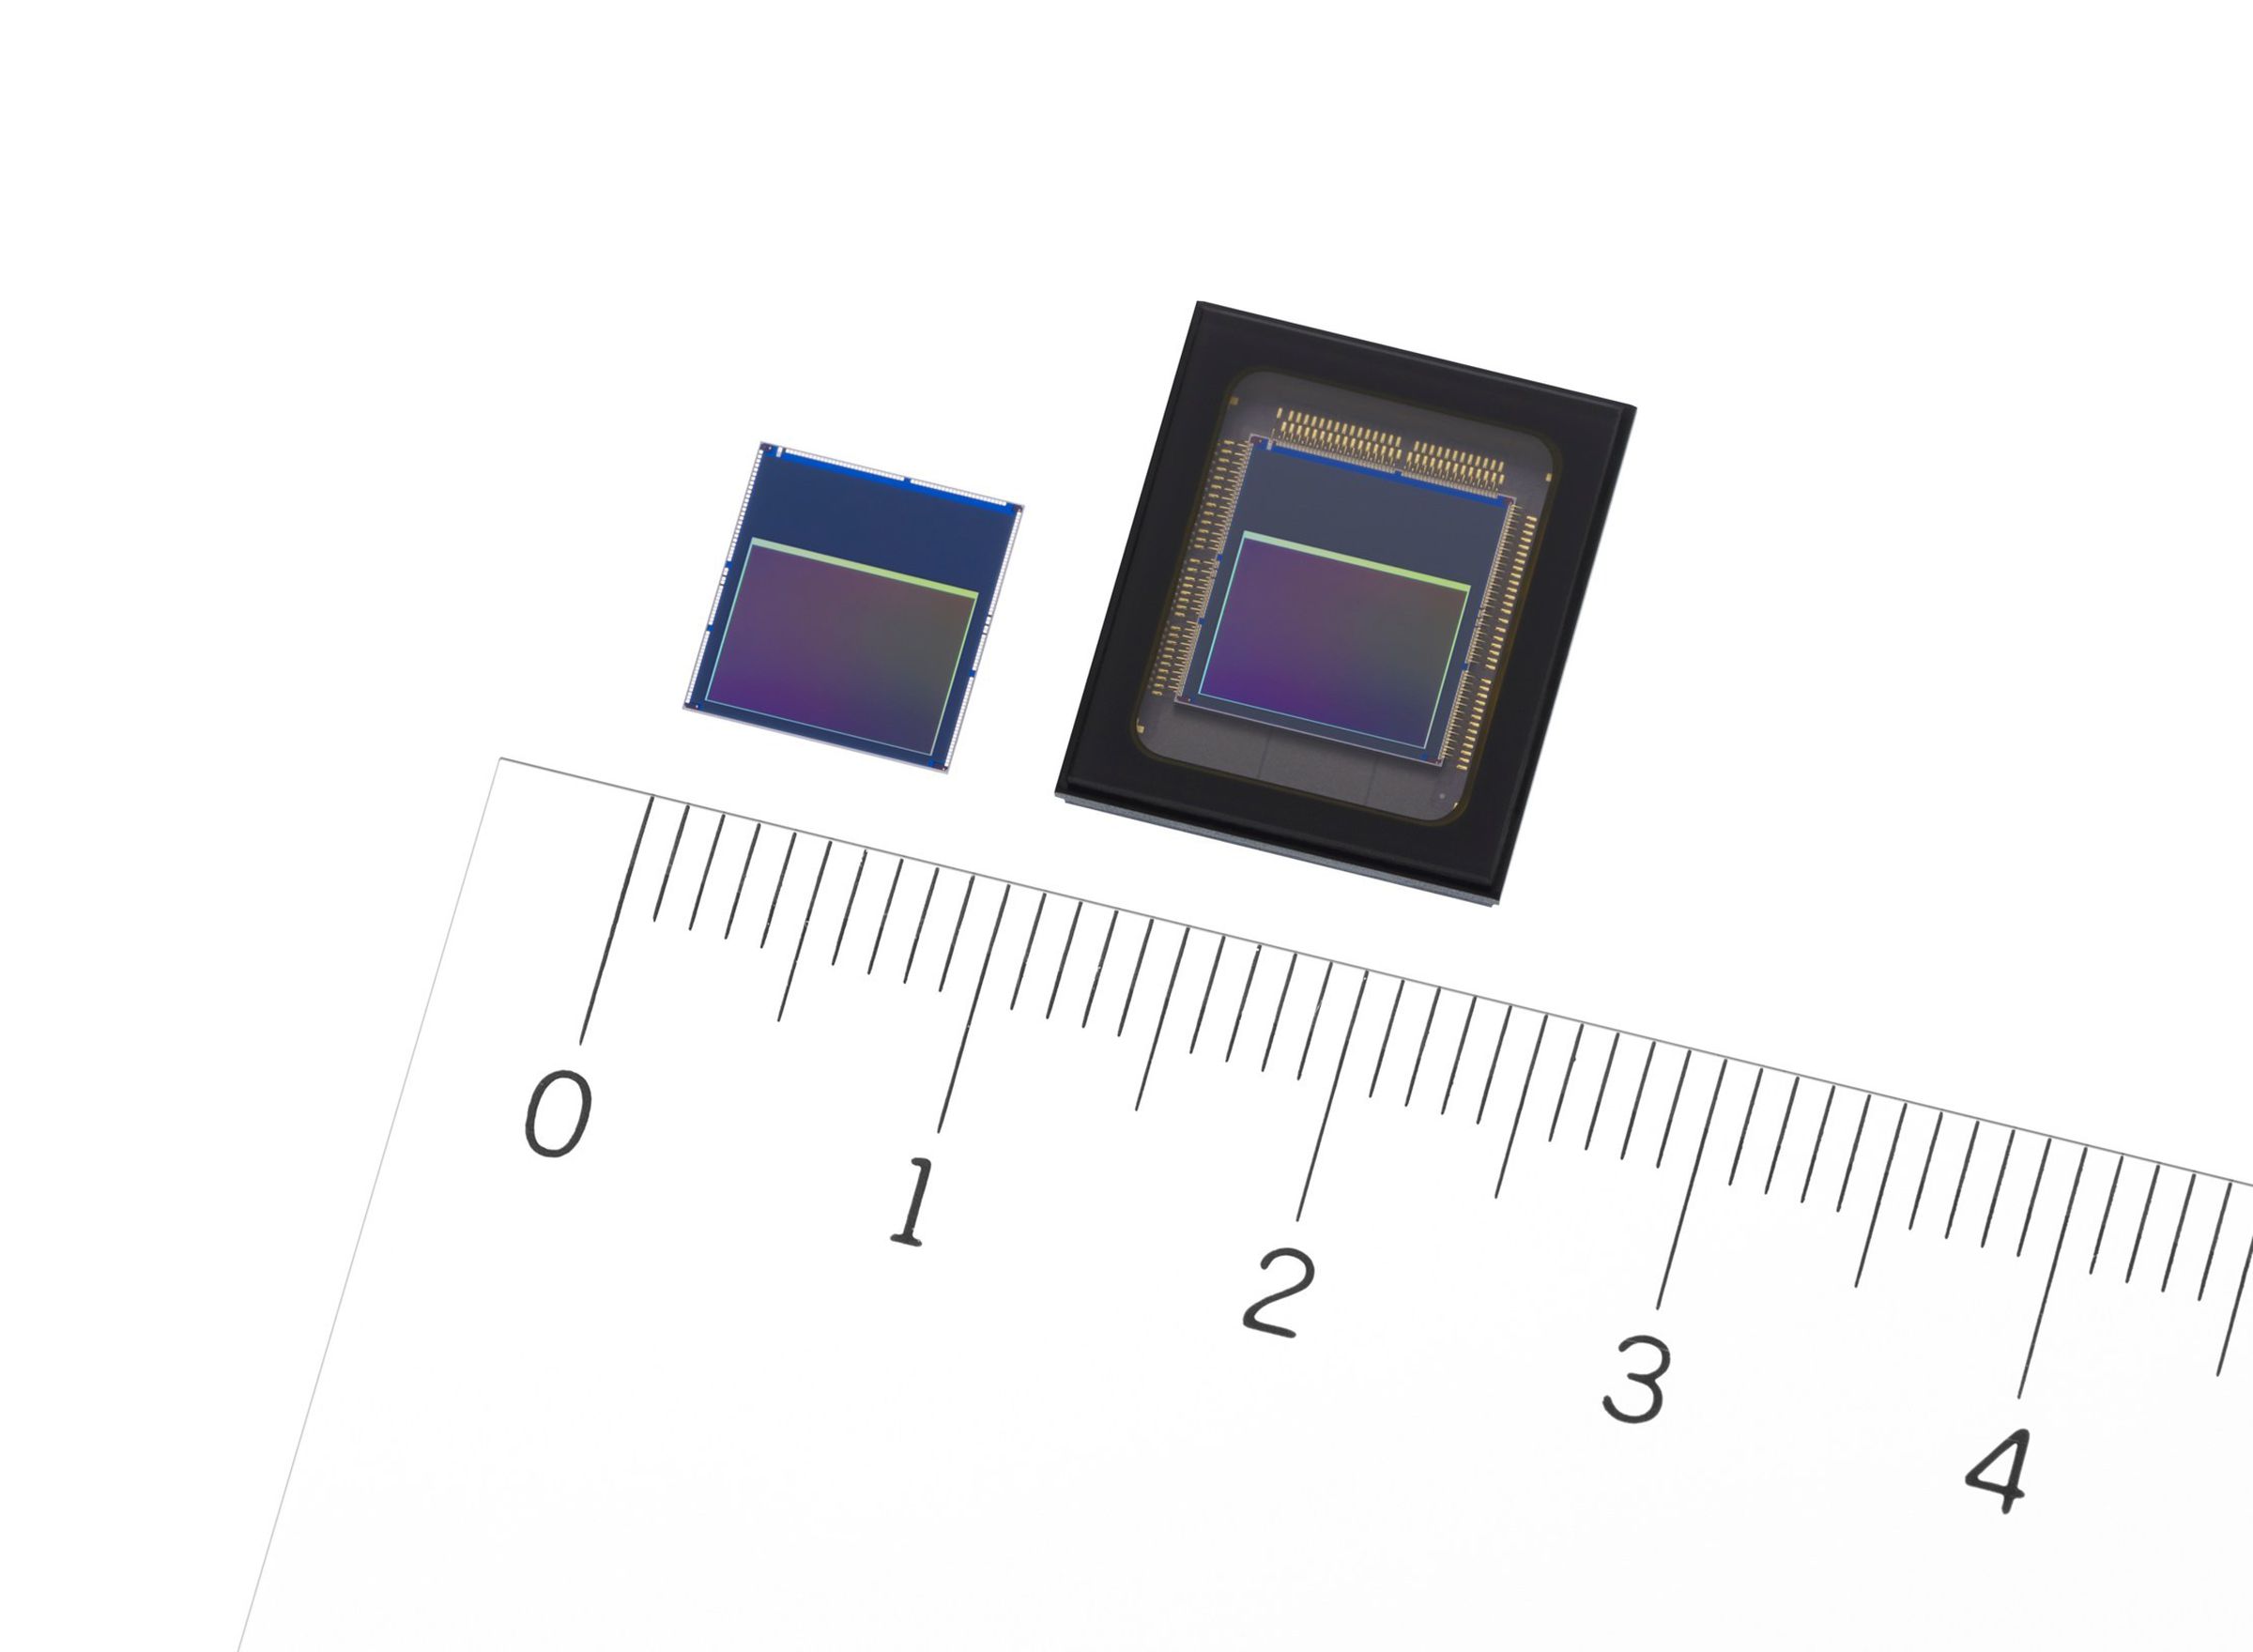 From left to right: the IMX500 as a bare chip and IMX501 as a package product.